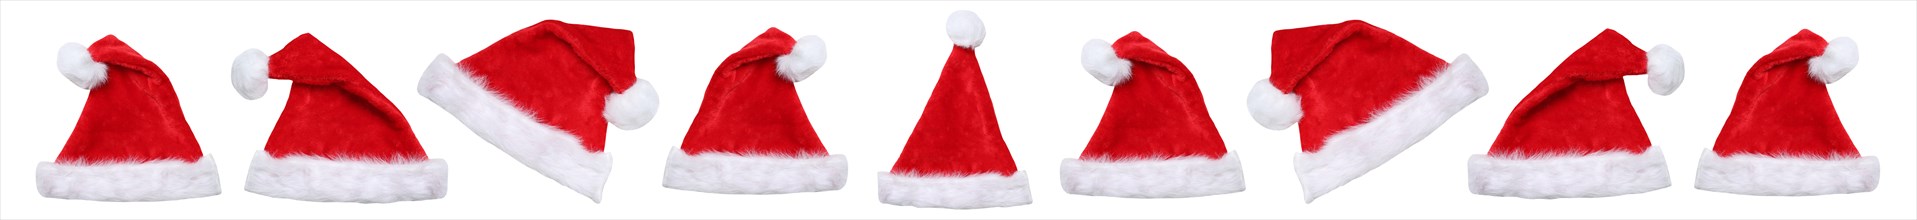 Christmas with Santa hats Santa hats Father Christmas in a row panorama cropped against a white background in Stuttgart